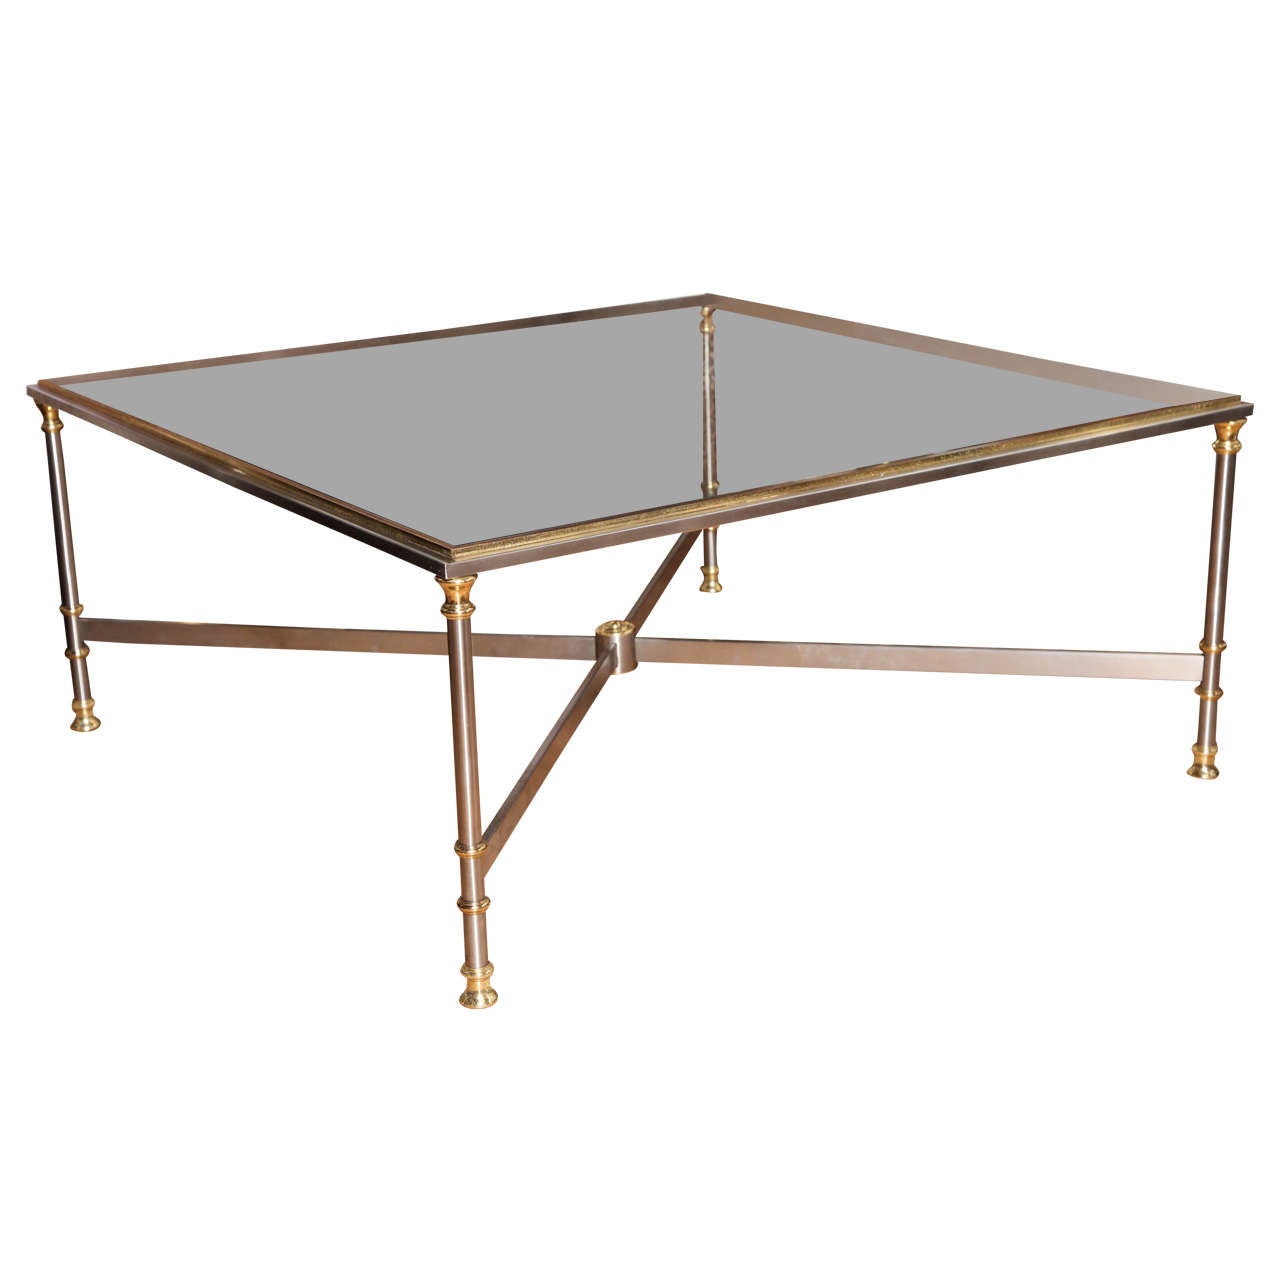 Large Steel and Brass Trimmed, Glass Insert Coffee Table, France circa 1960 For Sale